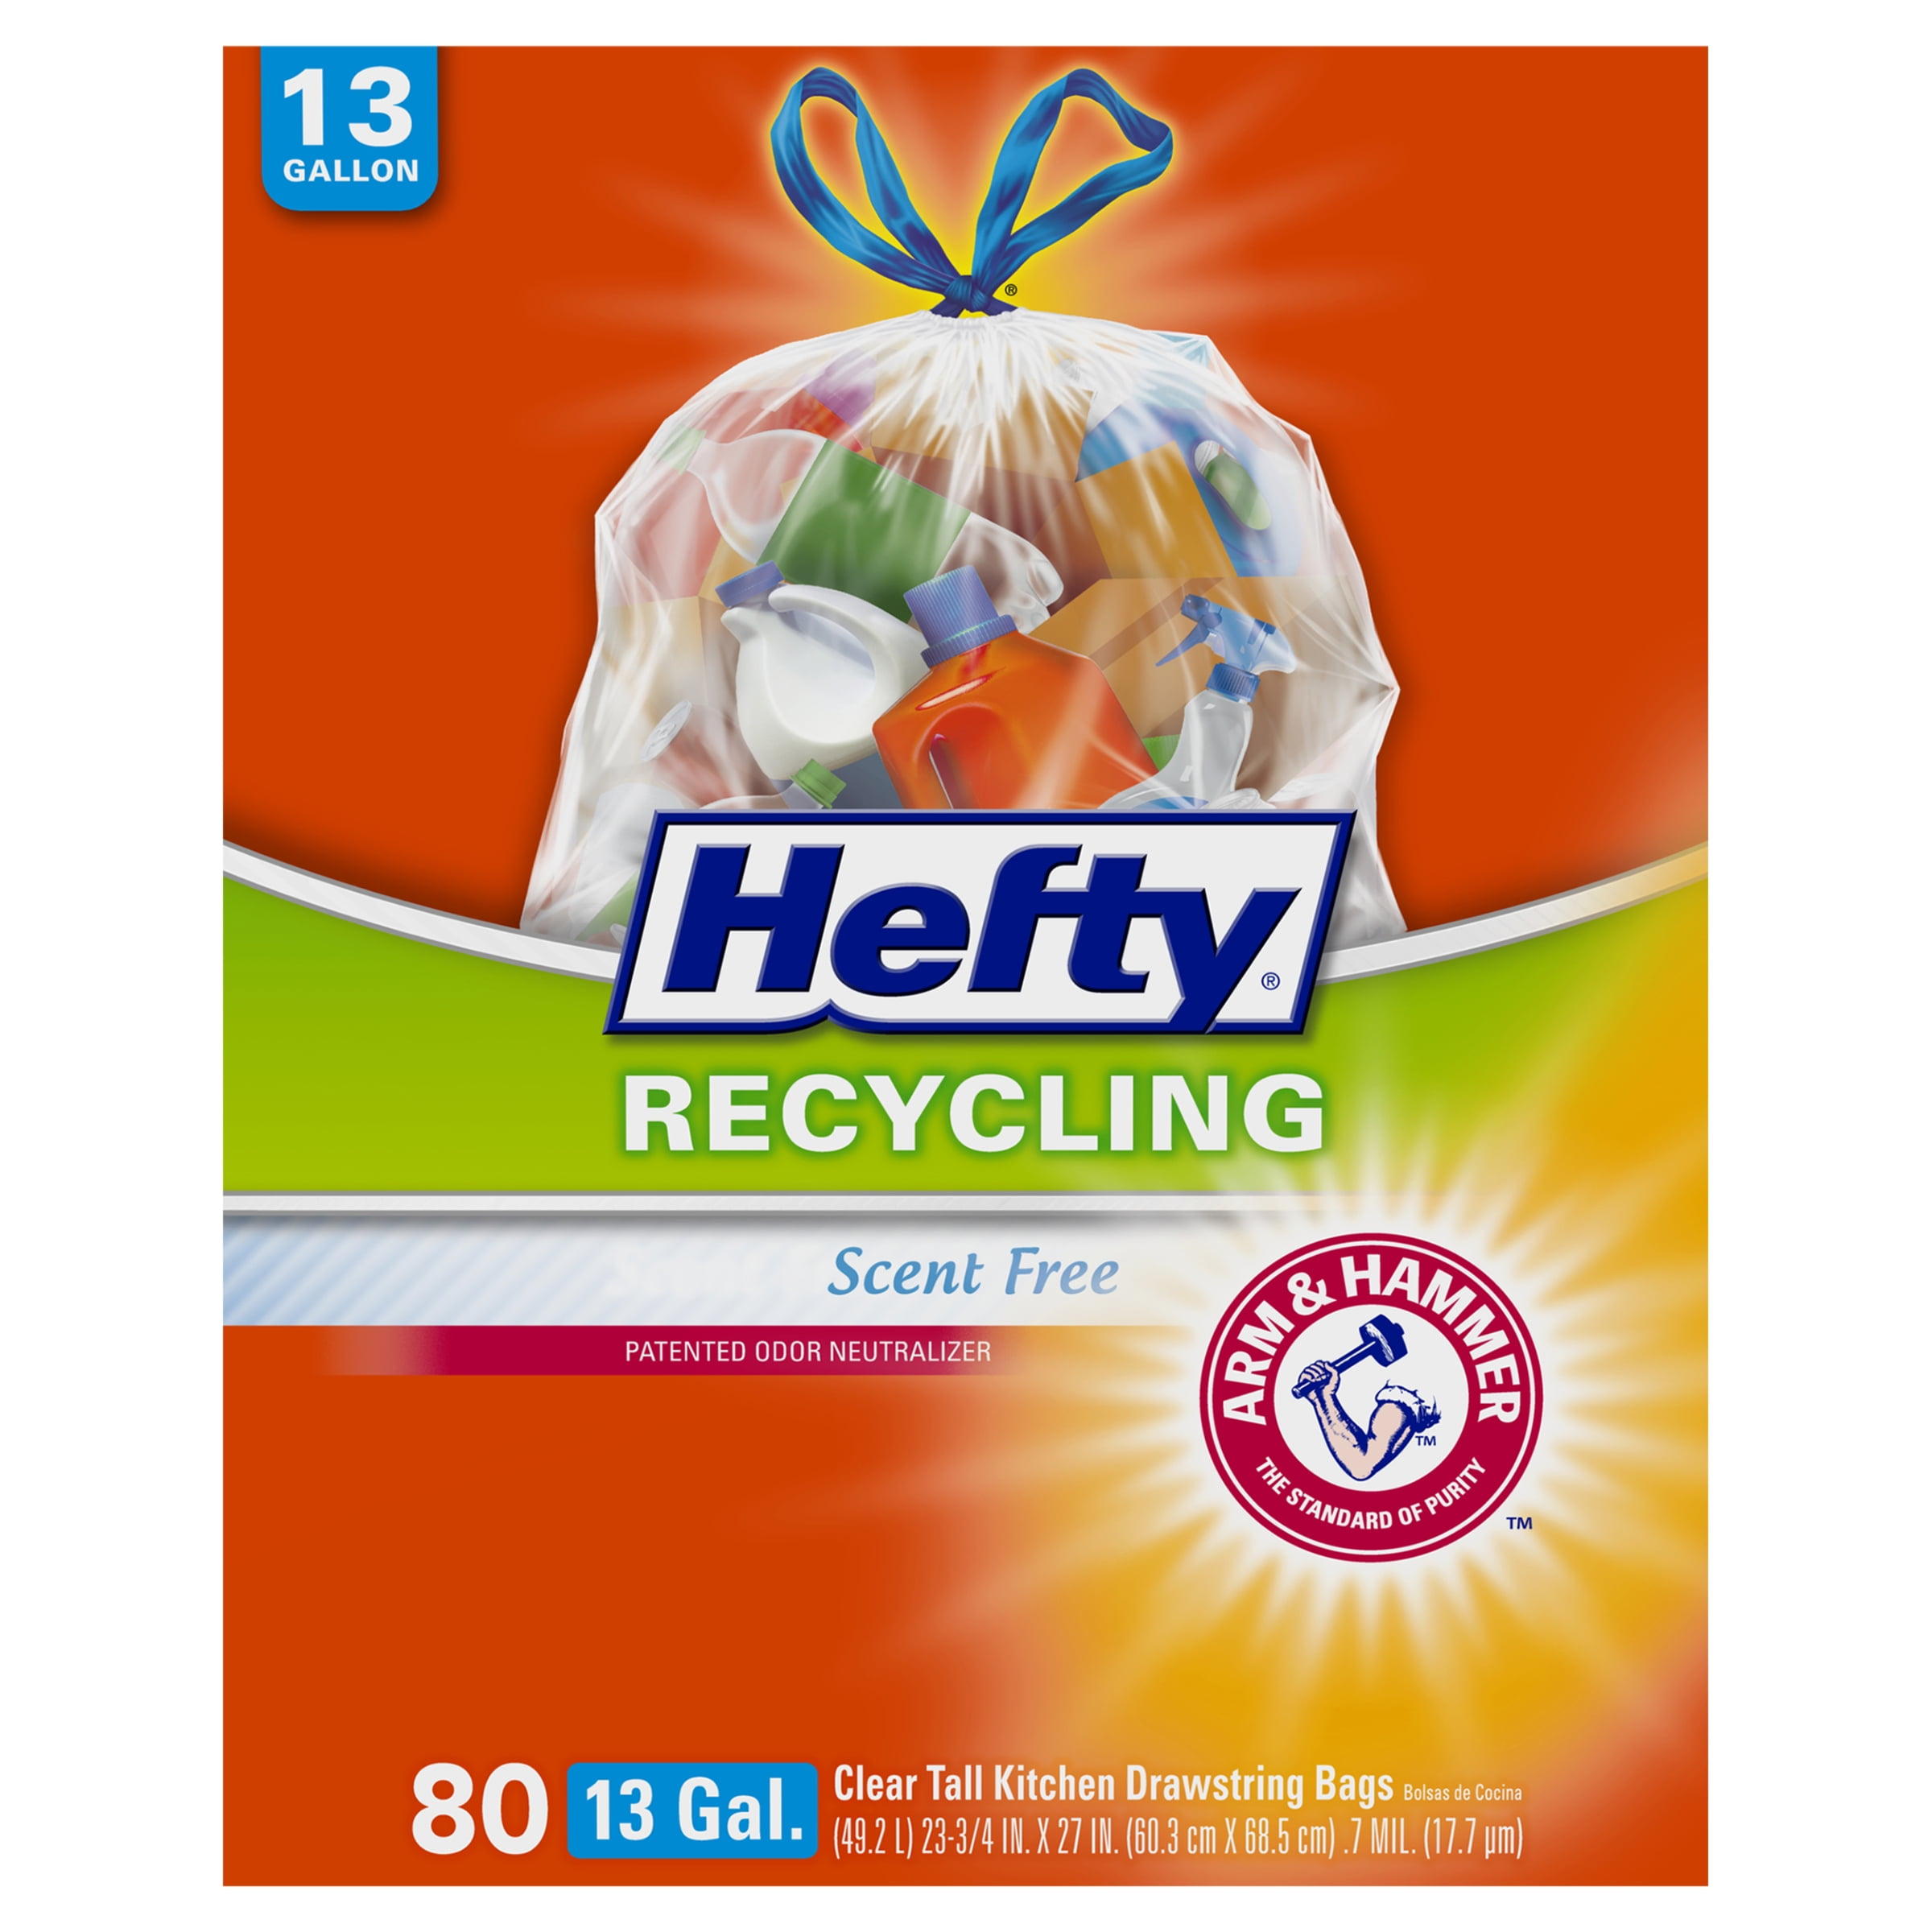 Details about   4 Packs,Hefty Recycling Tall Kitchen Trash Bags Clear 13 Gallon 80 Count,4 Packs 